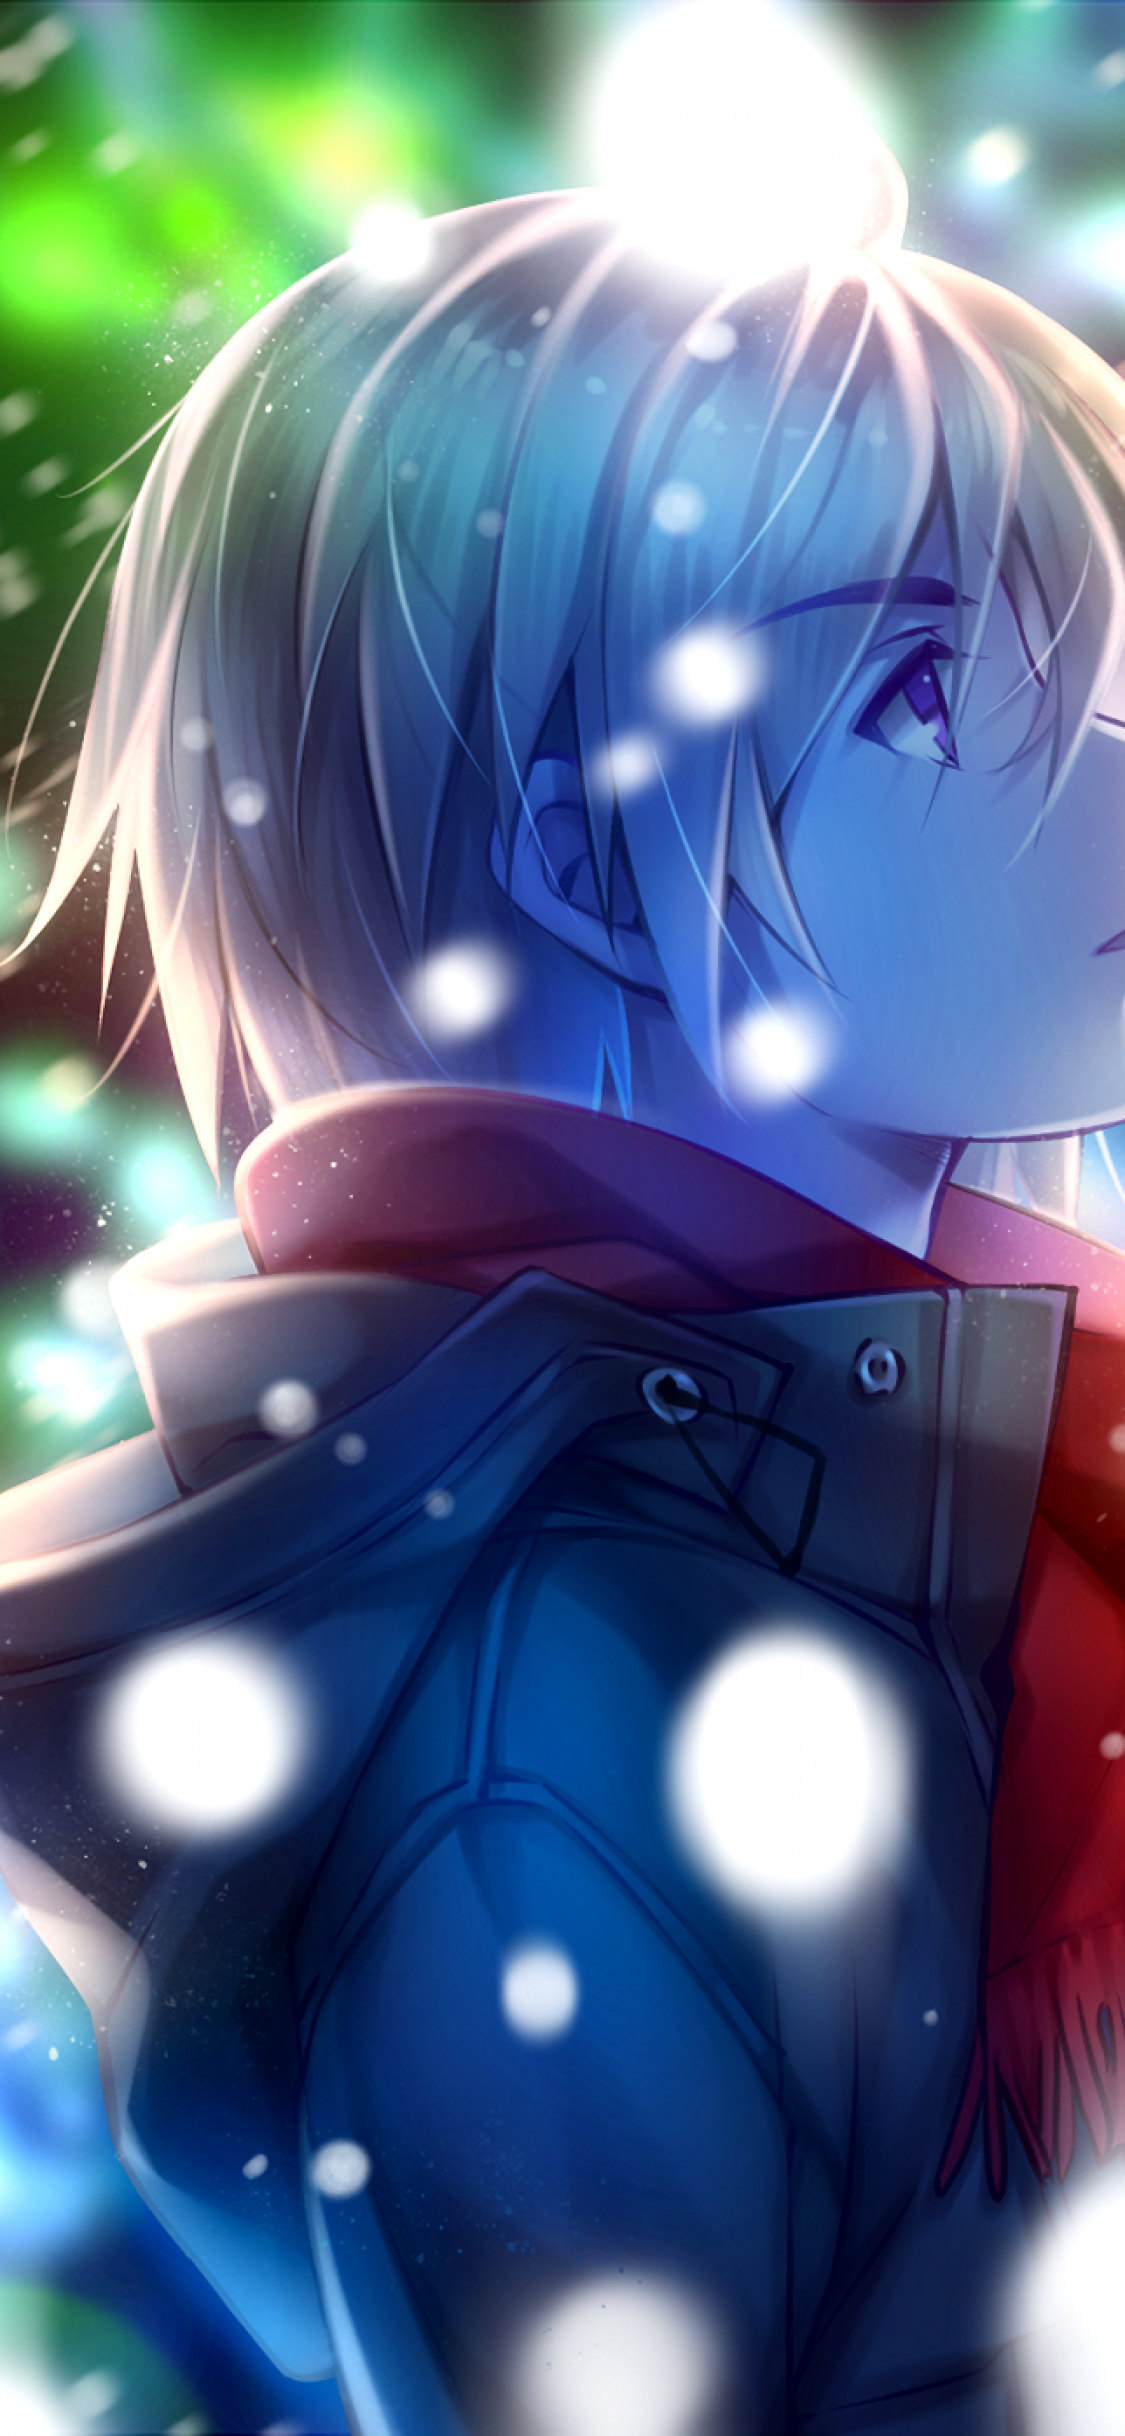 Download 1125x2436 Anime Boy, Profile View, Red Scarf, Winter, Snow, Coffee Wallpaper for iPhone 11 Pro & X